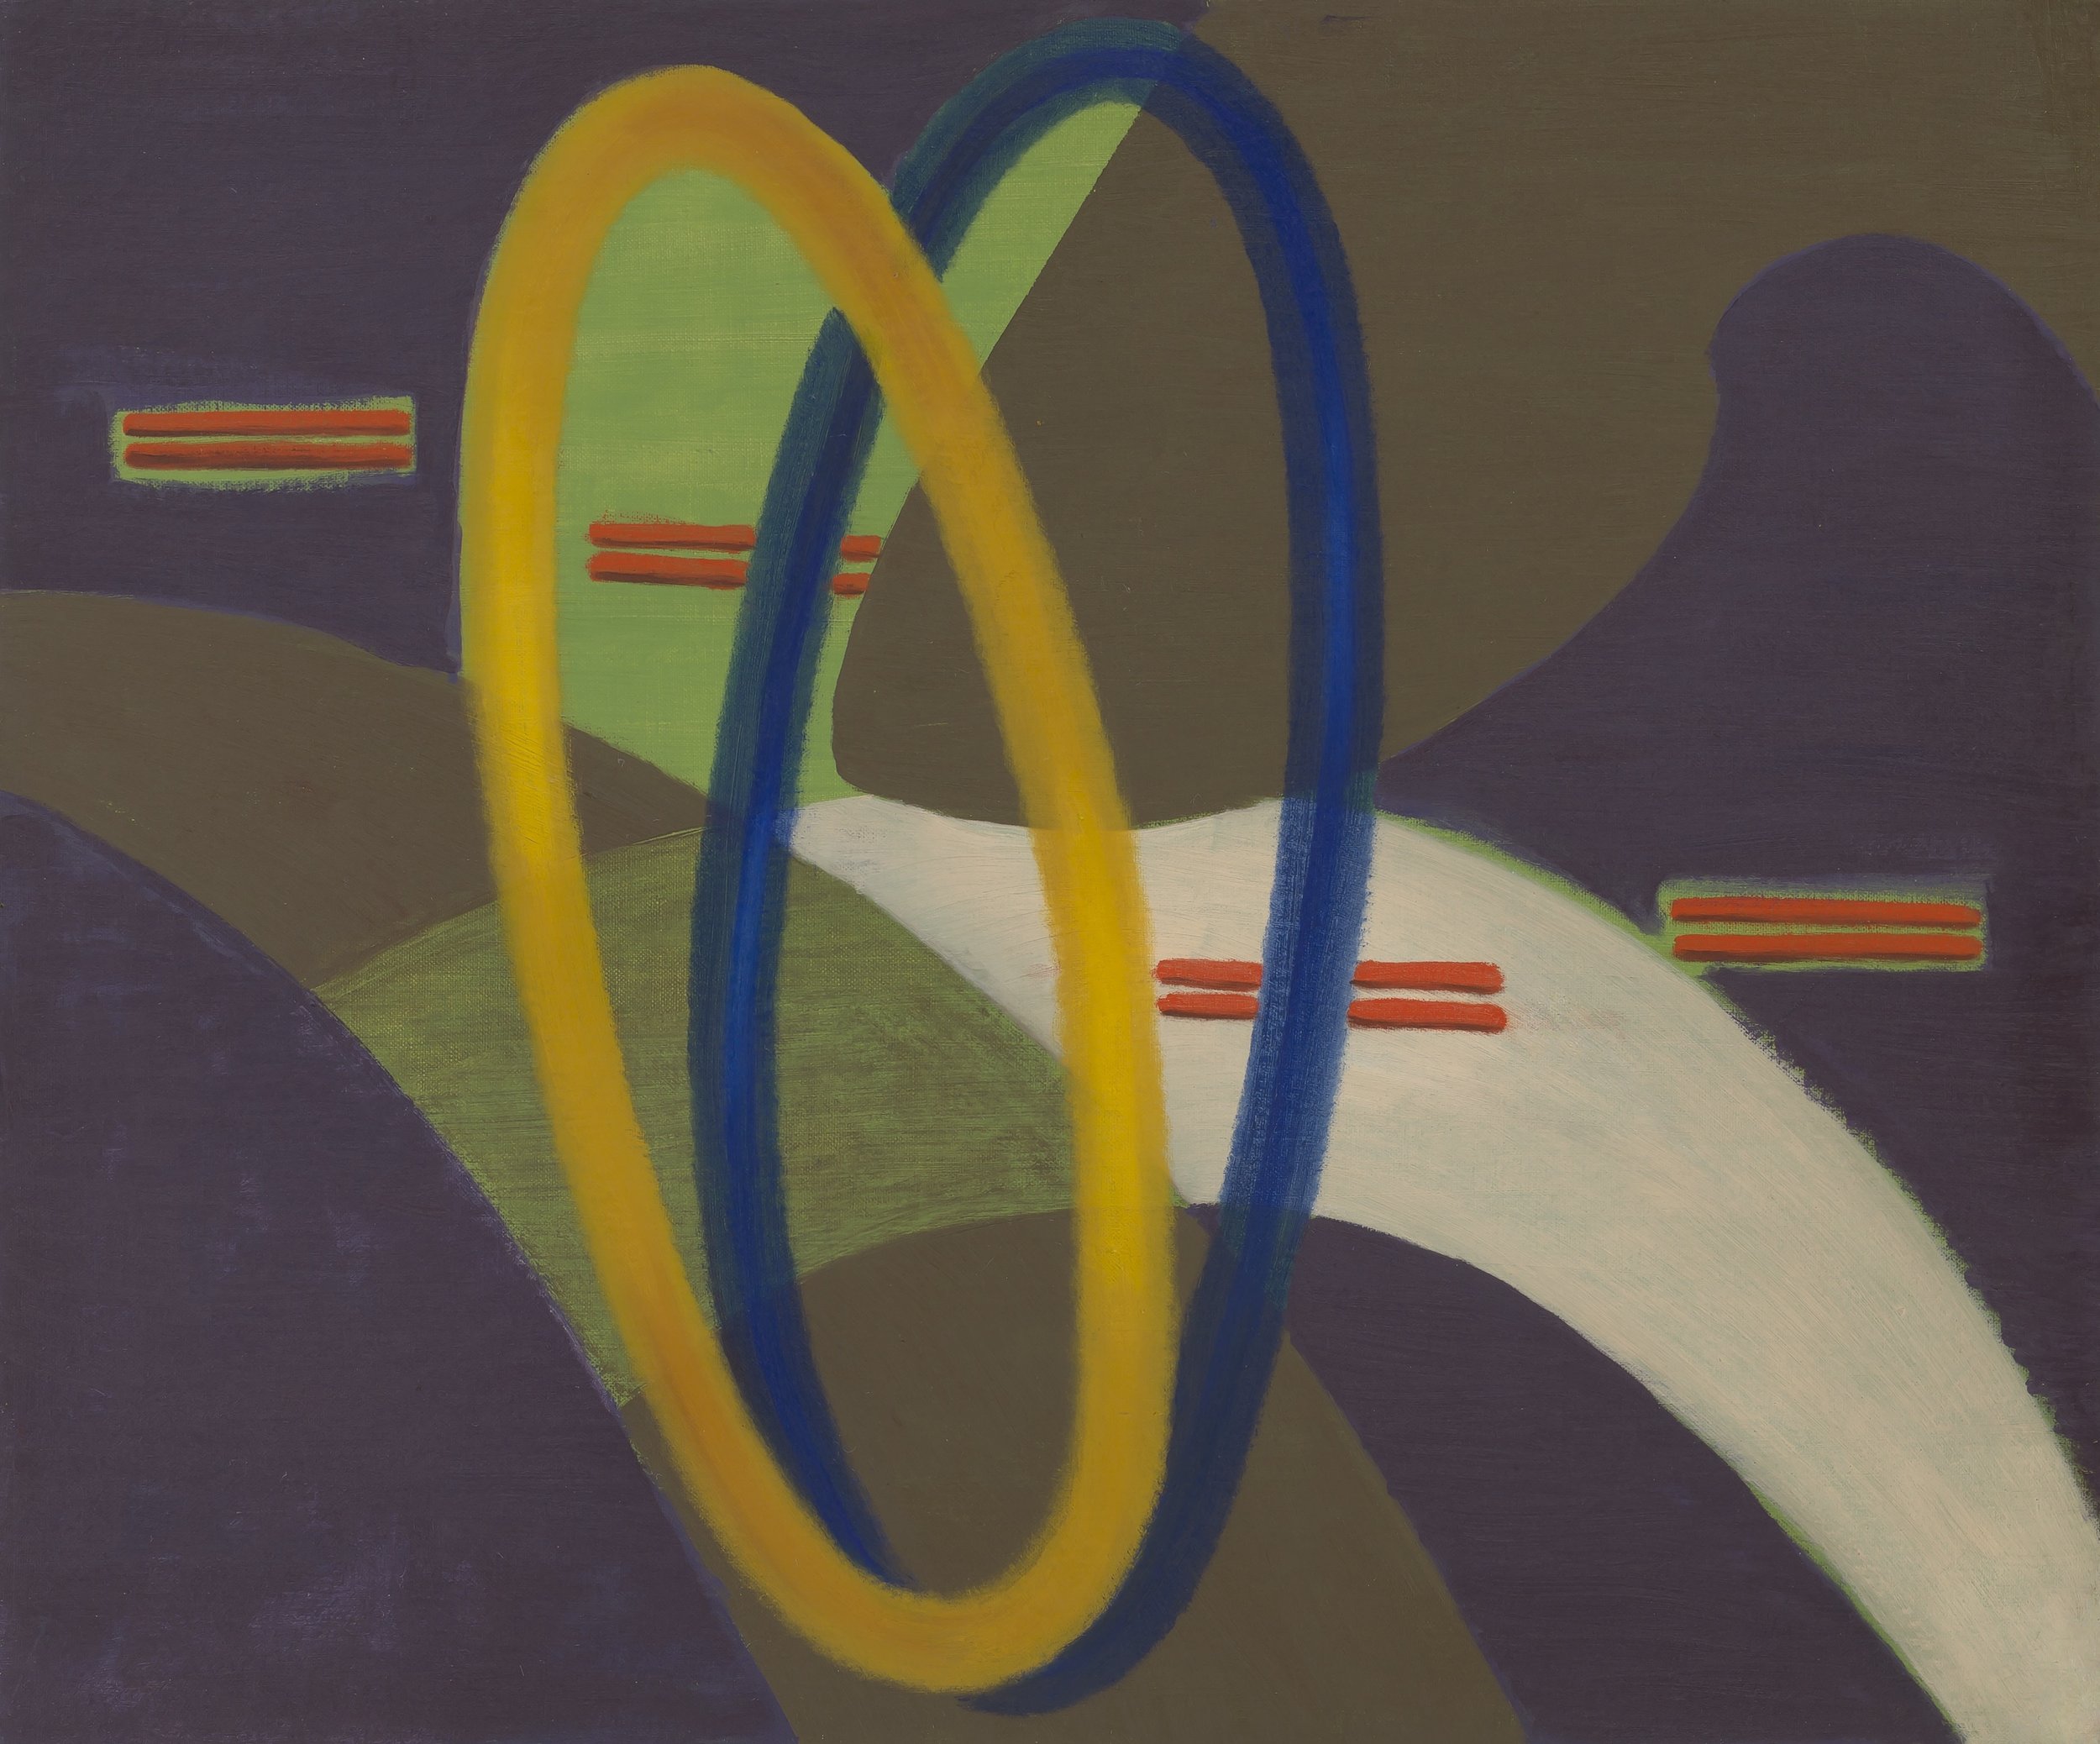 Abstraction of overlapping yellow and blue rings among pairs of orange-red dashes on a brown, eggplant, green, and white background.